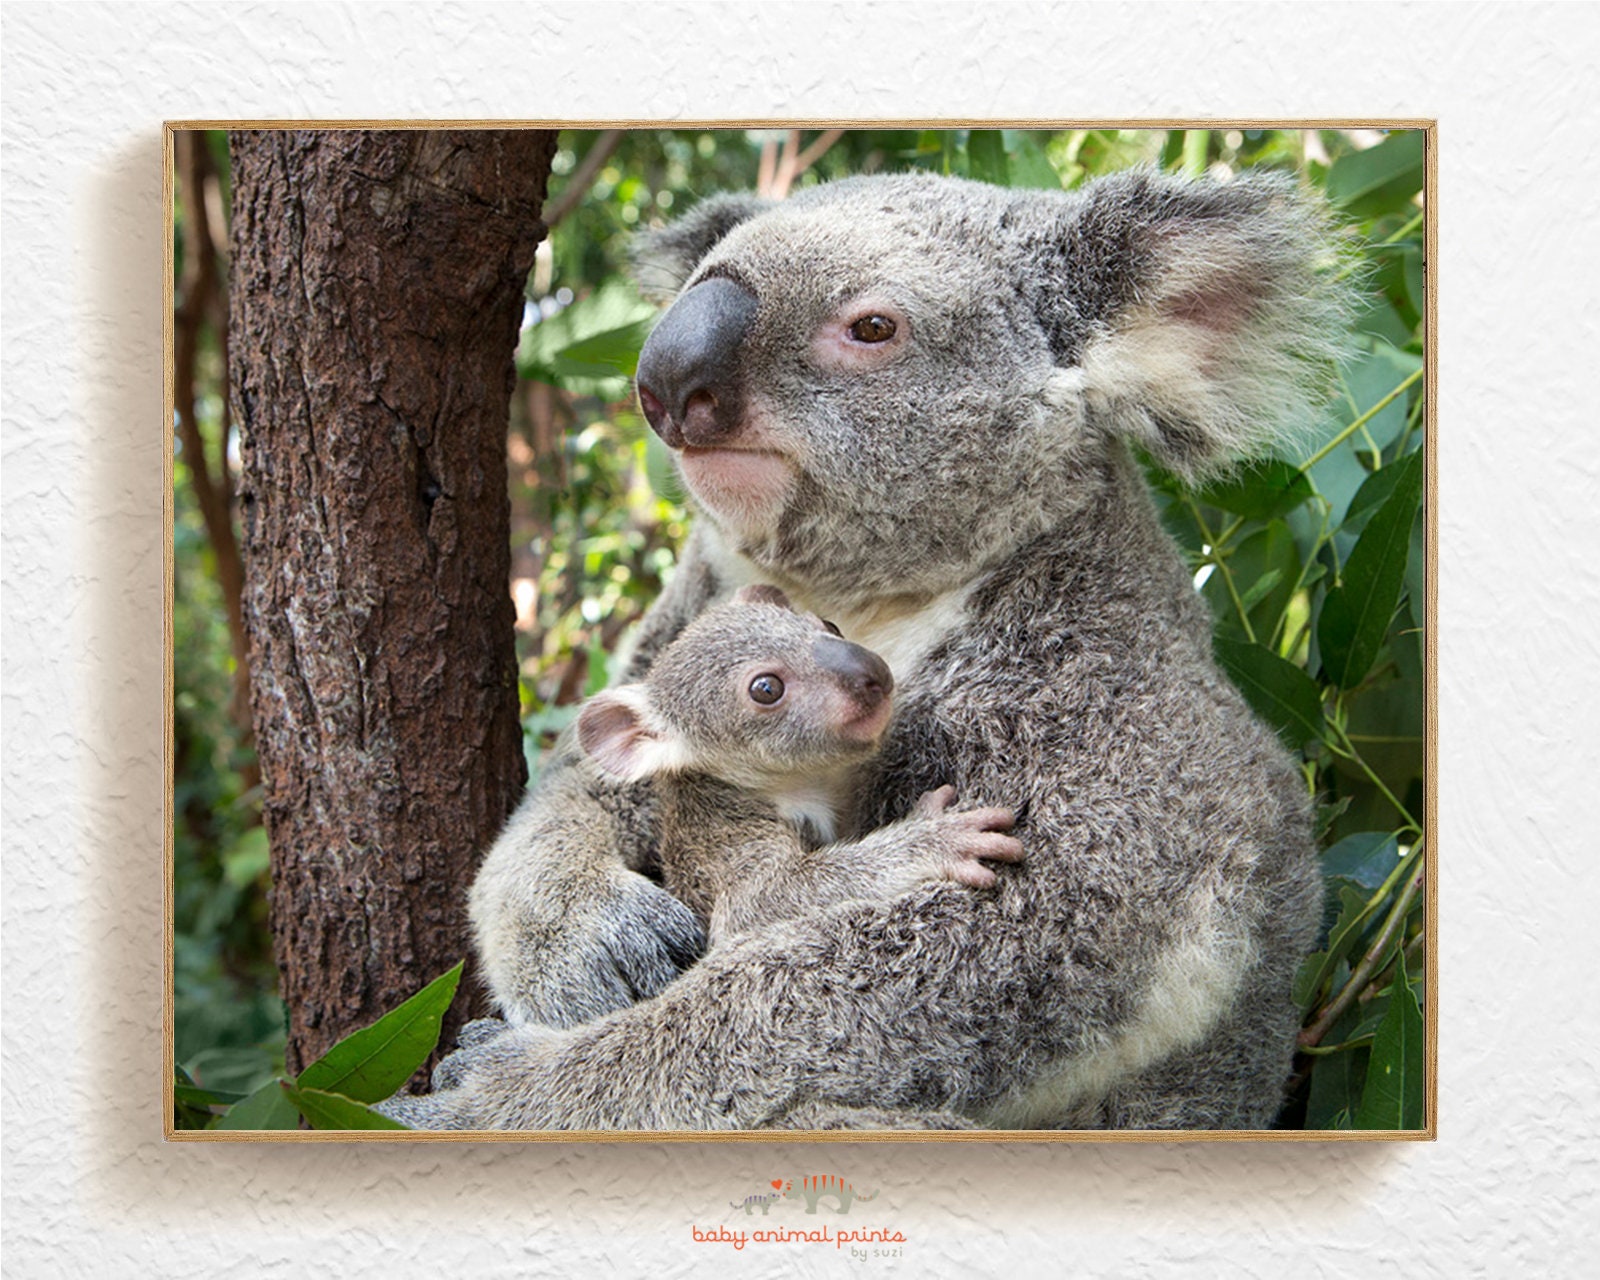 Animal Picture on Canvas, Cute Baby Koala, Landscape Animals on Canvas,  Animal Canvas Wall Art Picture for Living Room Office Decor, 70 x 100 cm  (28 x 40 inches) Frameless : 